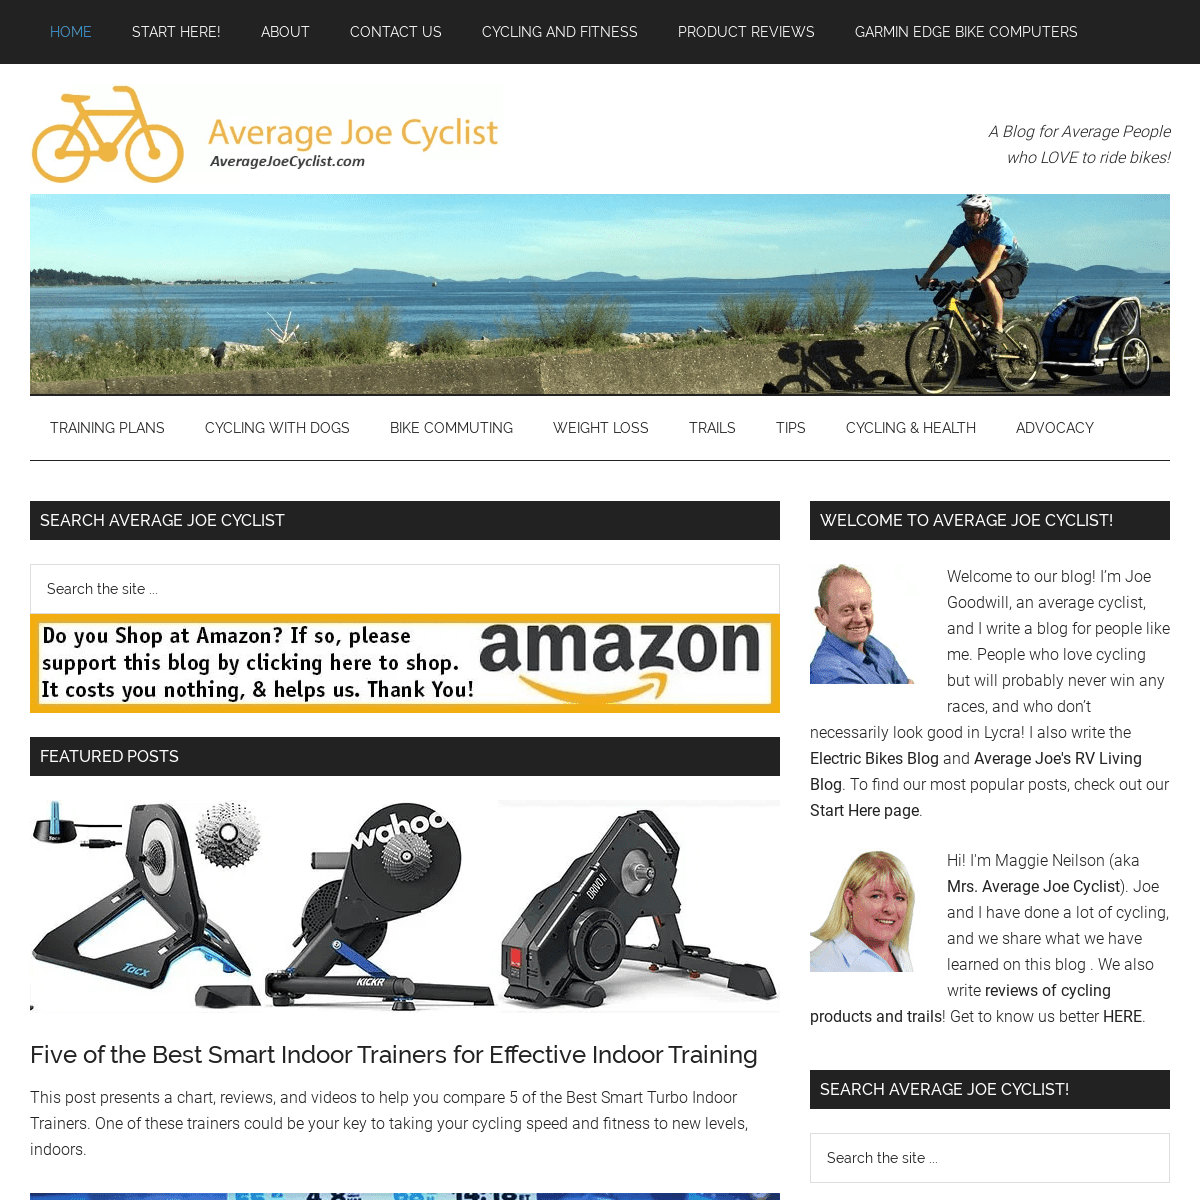 A complete backup of averagejoecyclist.com